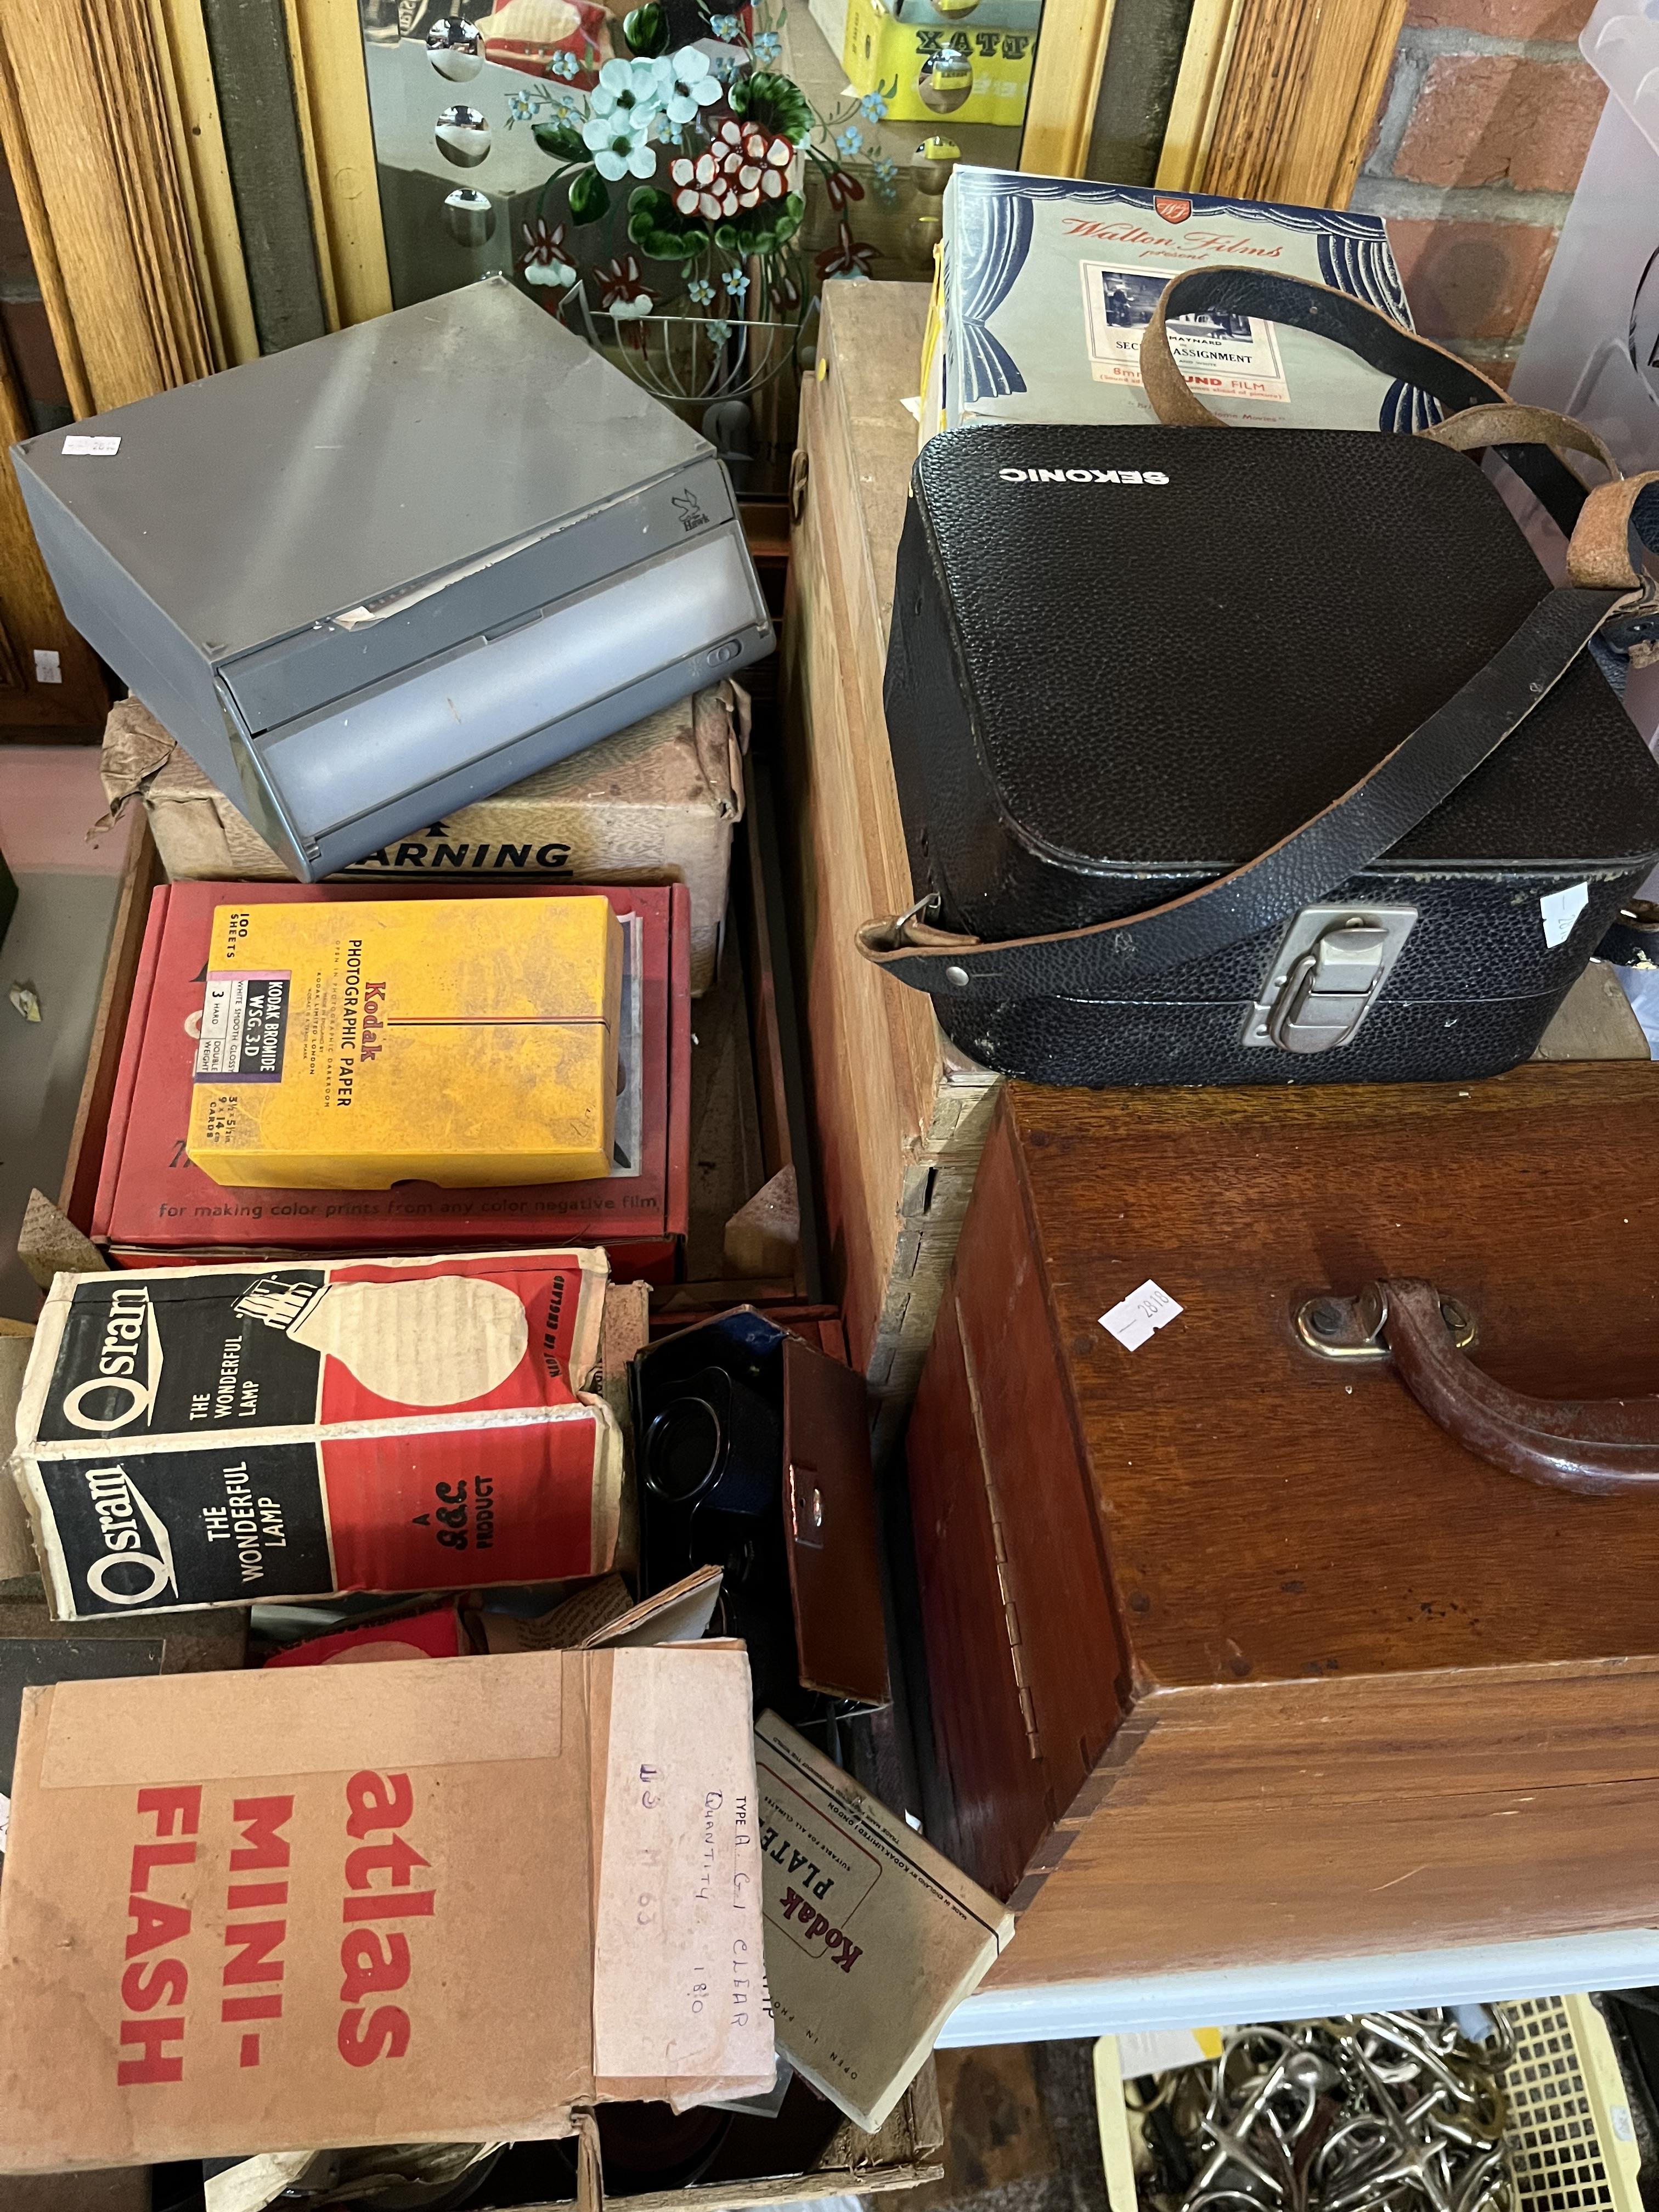 A quantity of vintage photography and film paraphernalia